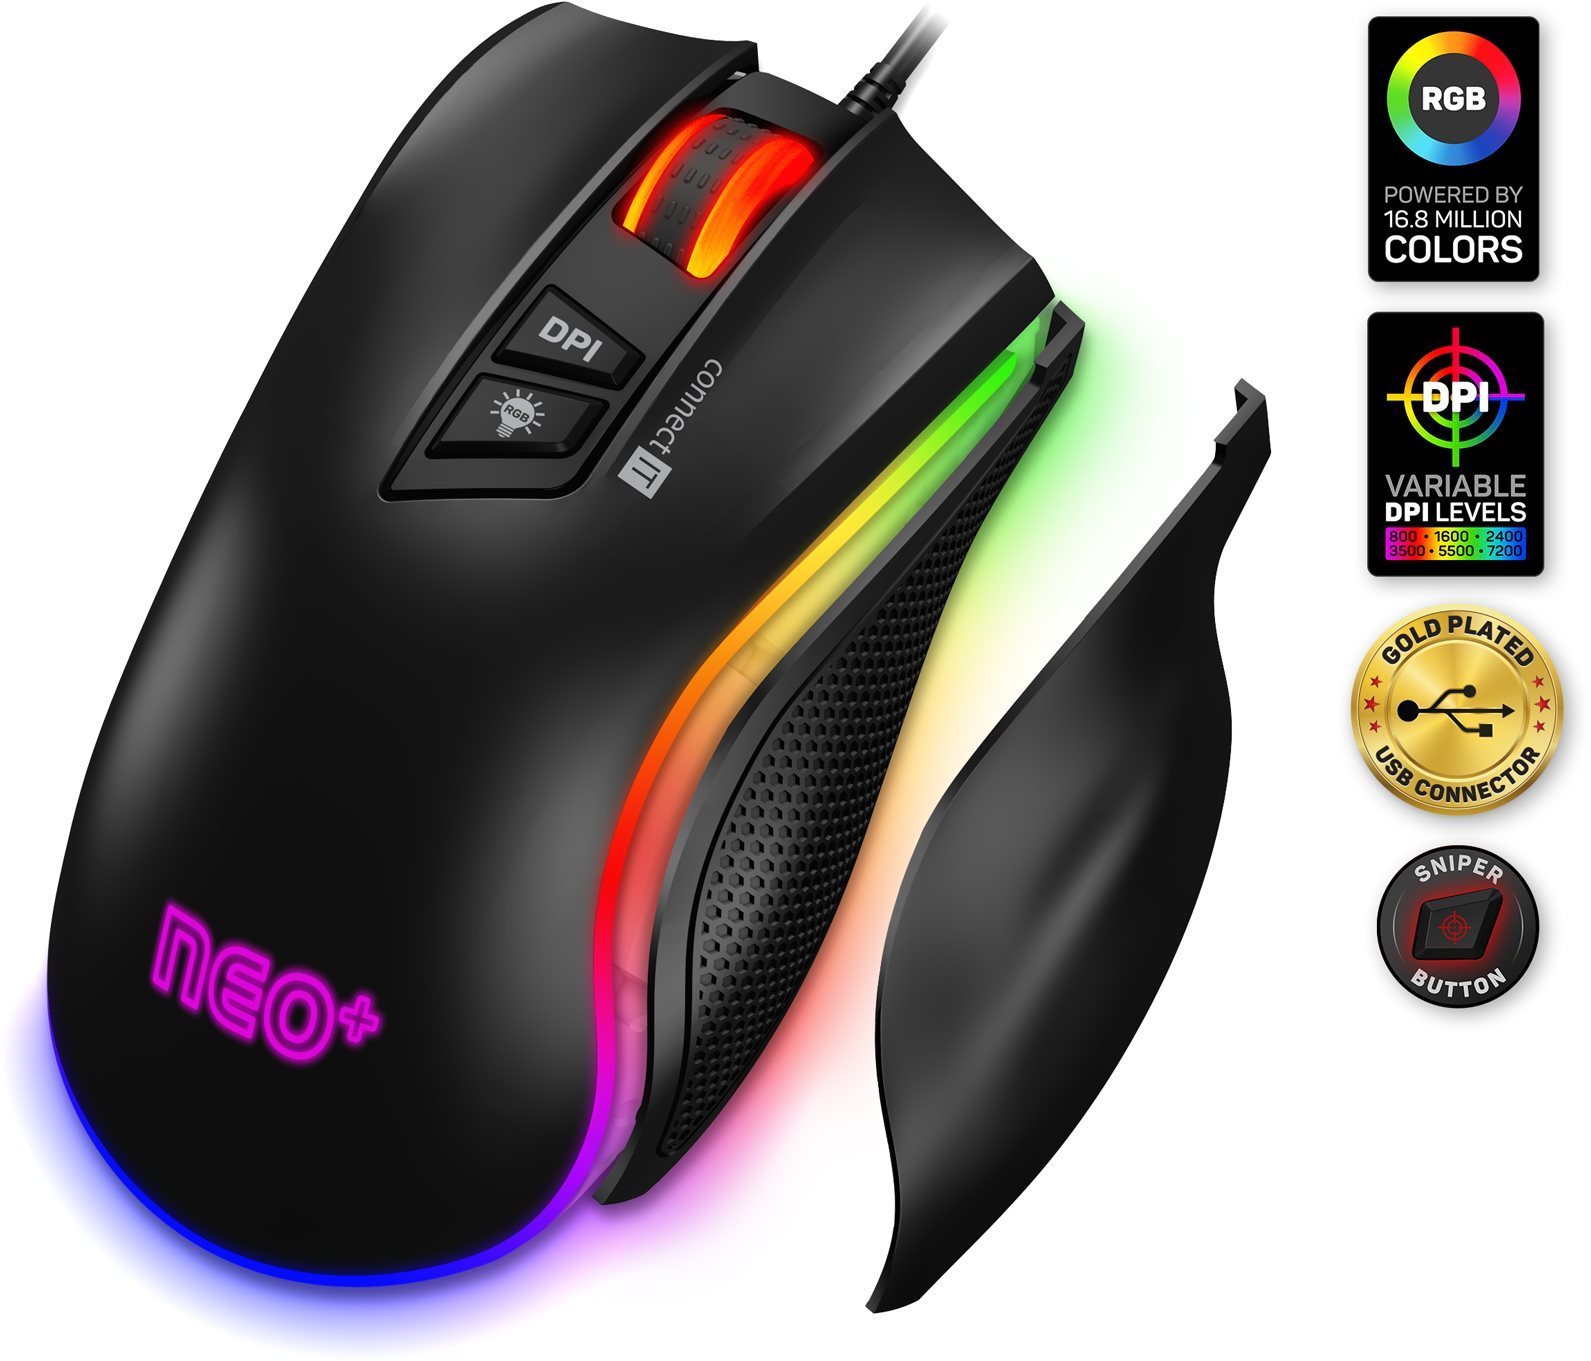 CONNECT IT NEO+ Pro gaming mouse, black